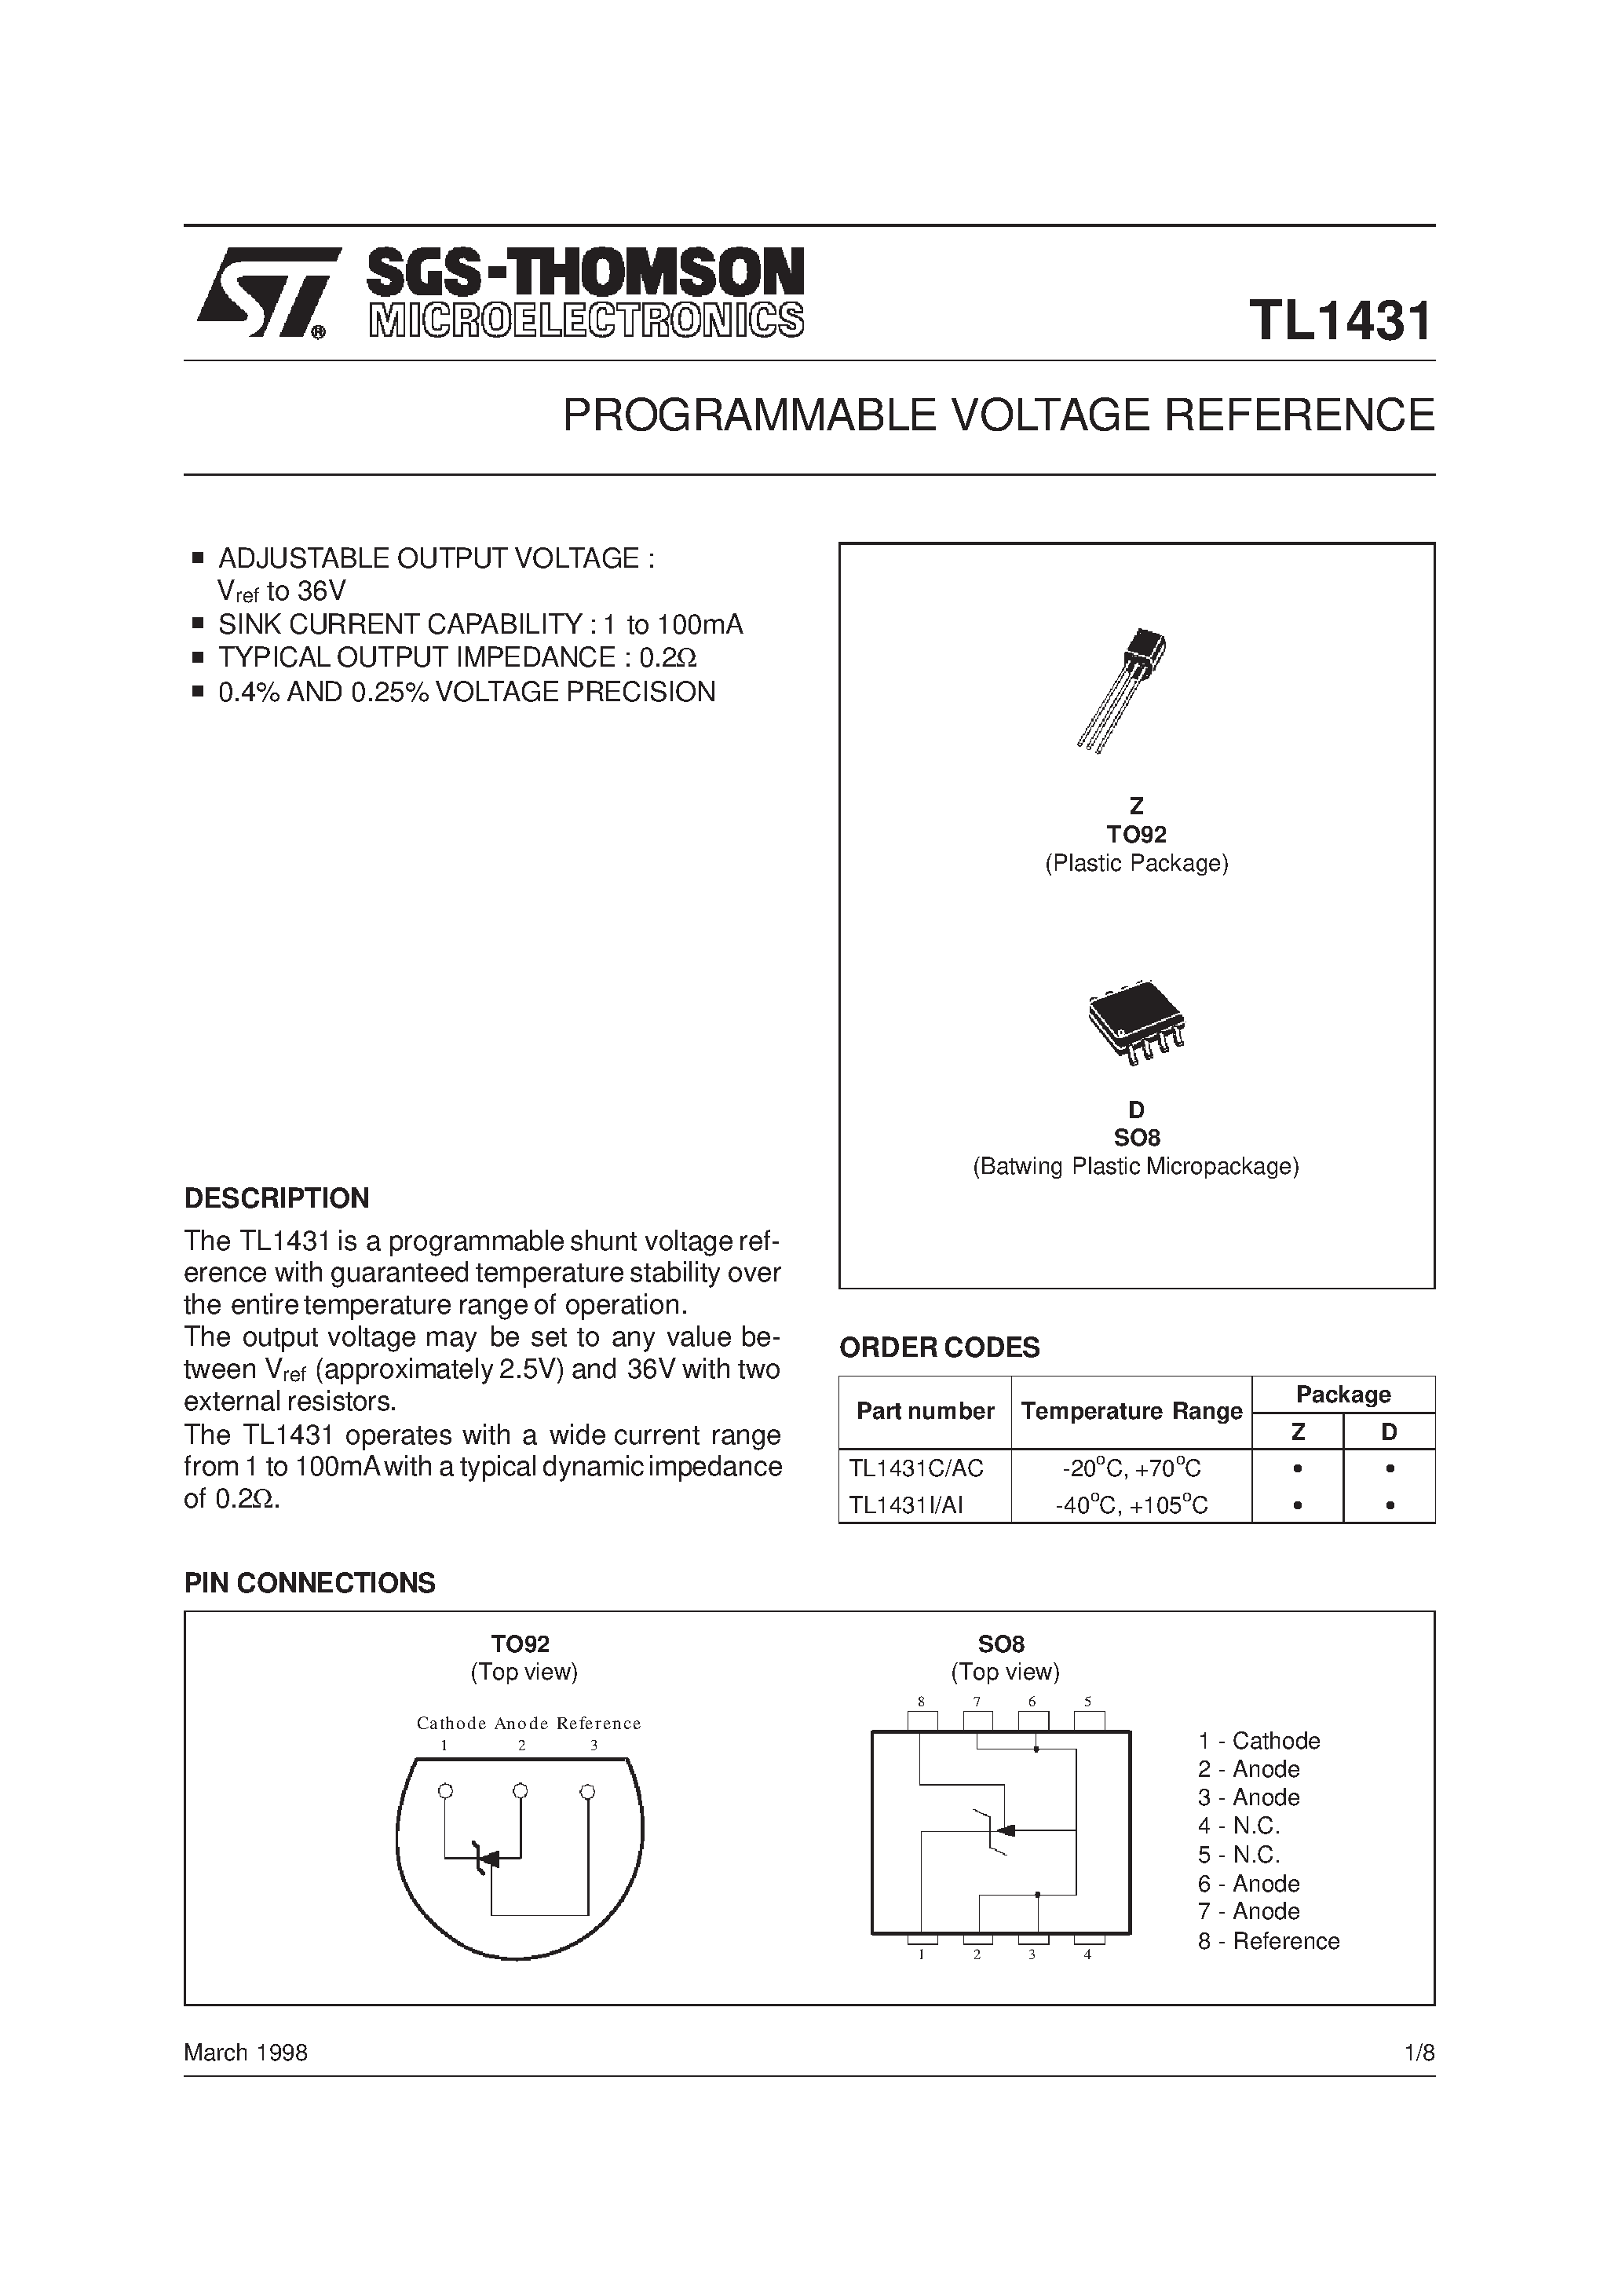 Даташит TL1431ACZ - PROGRAMMABLE VOLTAGE REFERENCE страница 1